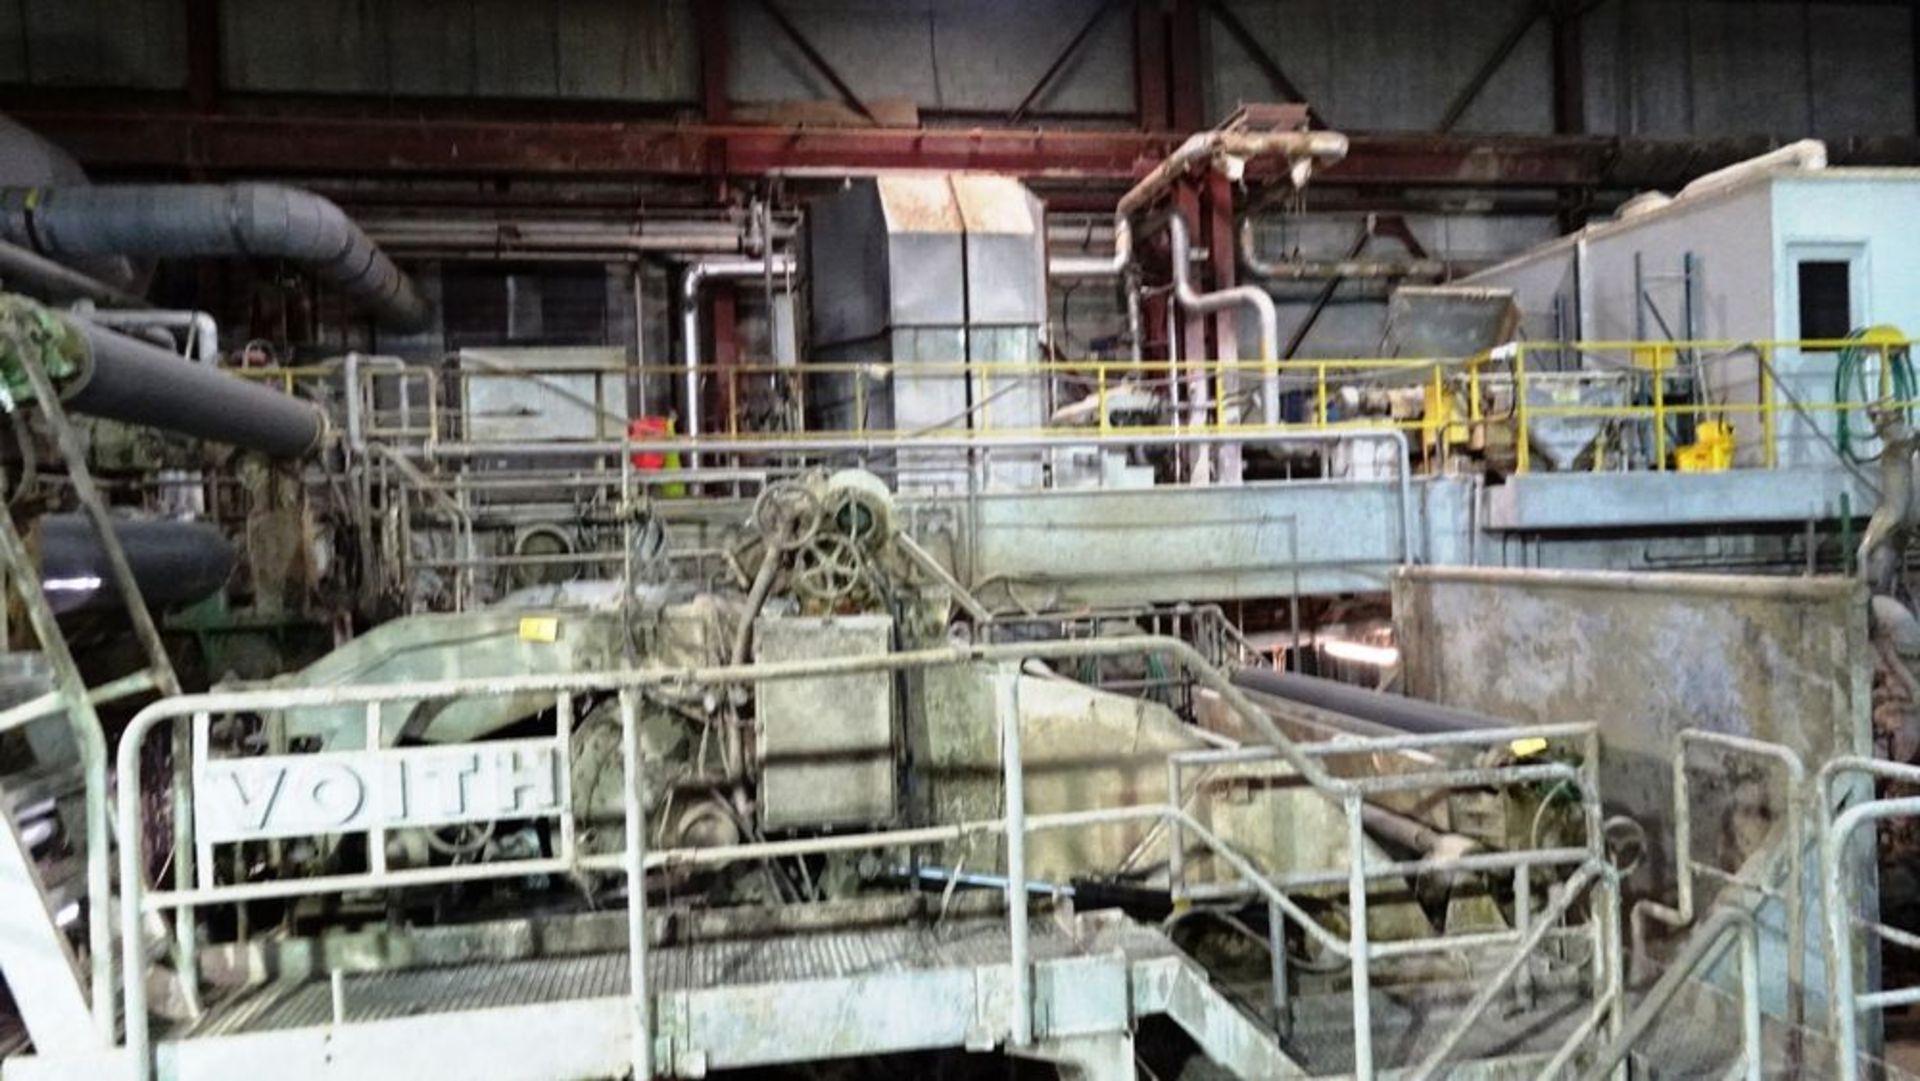 VOITH 104" TRIM YANKEE TISSUE MILL - NOTE: TO BE SOLD BY PRIVATE TREATY, CONTACT AUCTIONEER DIRECT - Image 9 of 273